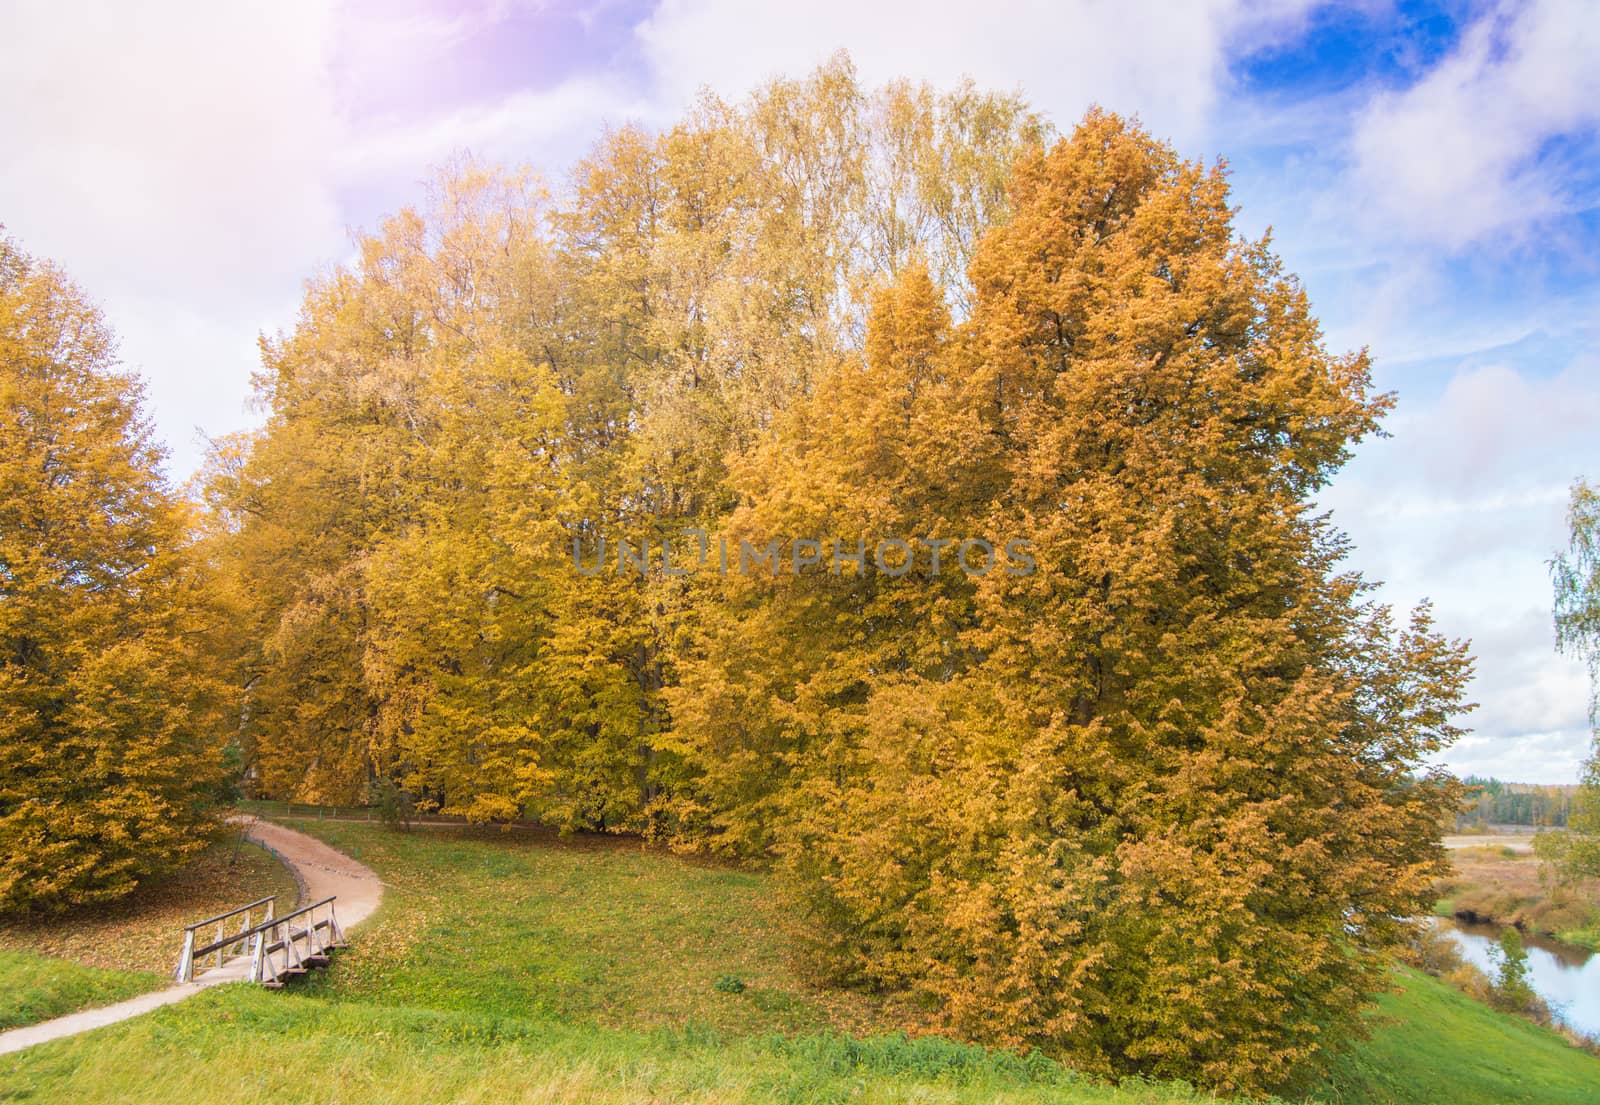 Picturesque rural autumn landscape with trees, road, wooden bridge by claire_lucia